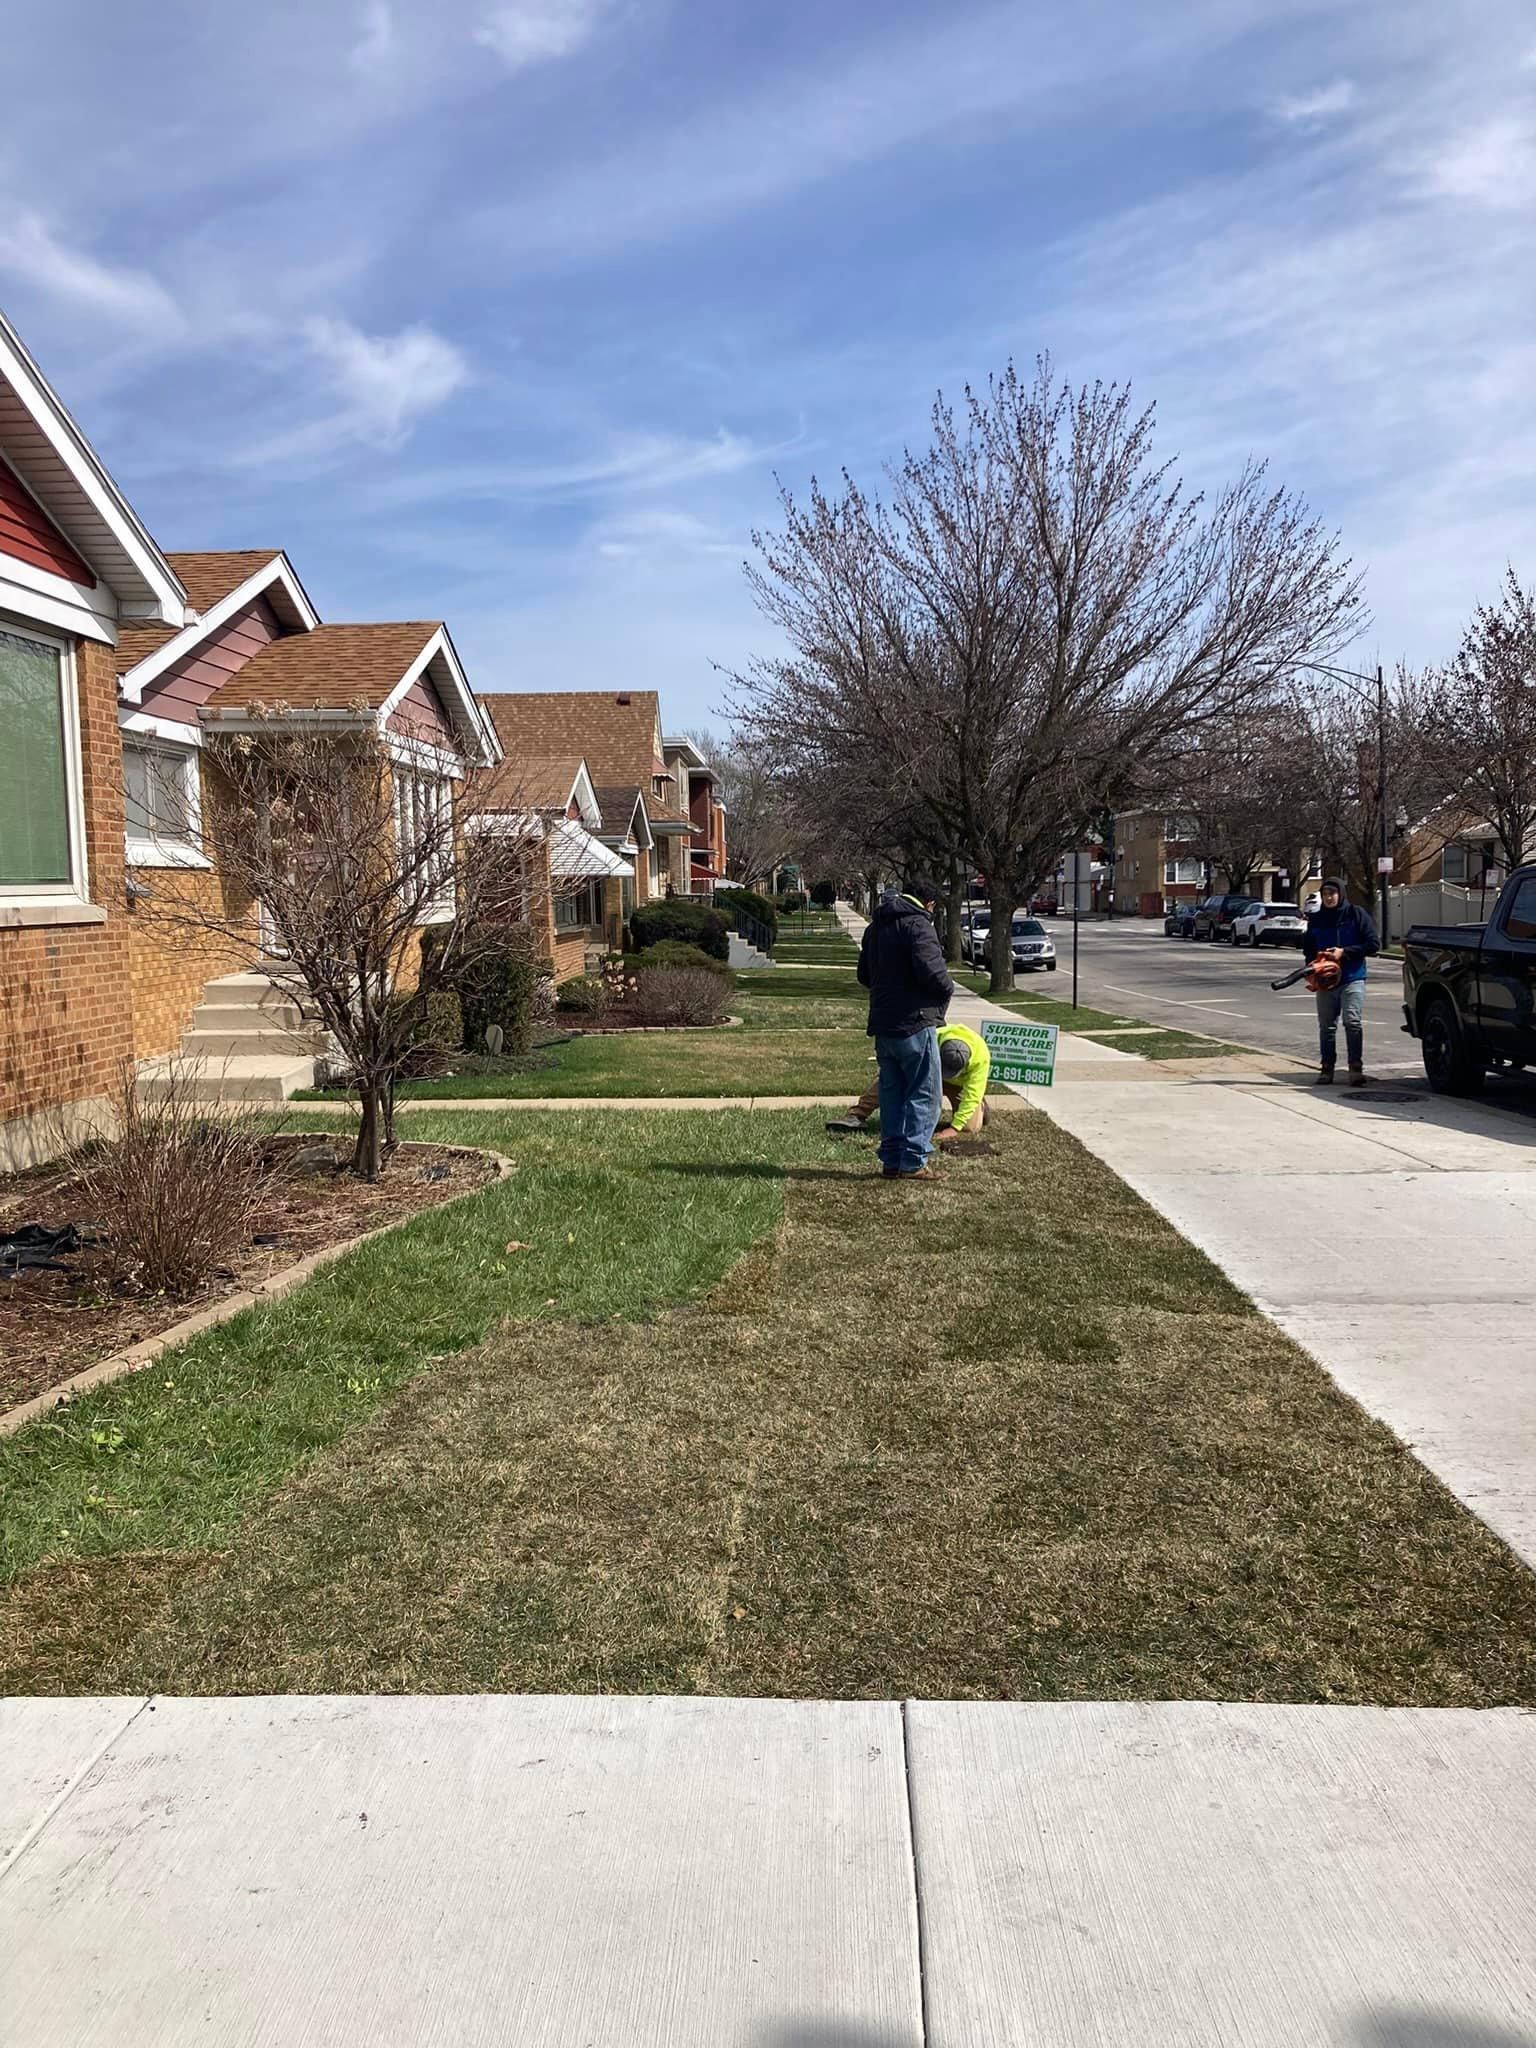  for Superior Lawn Care & Snow Removal LLC  in Chicago, IL